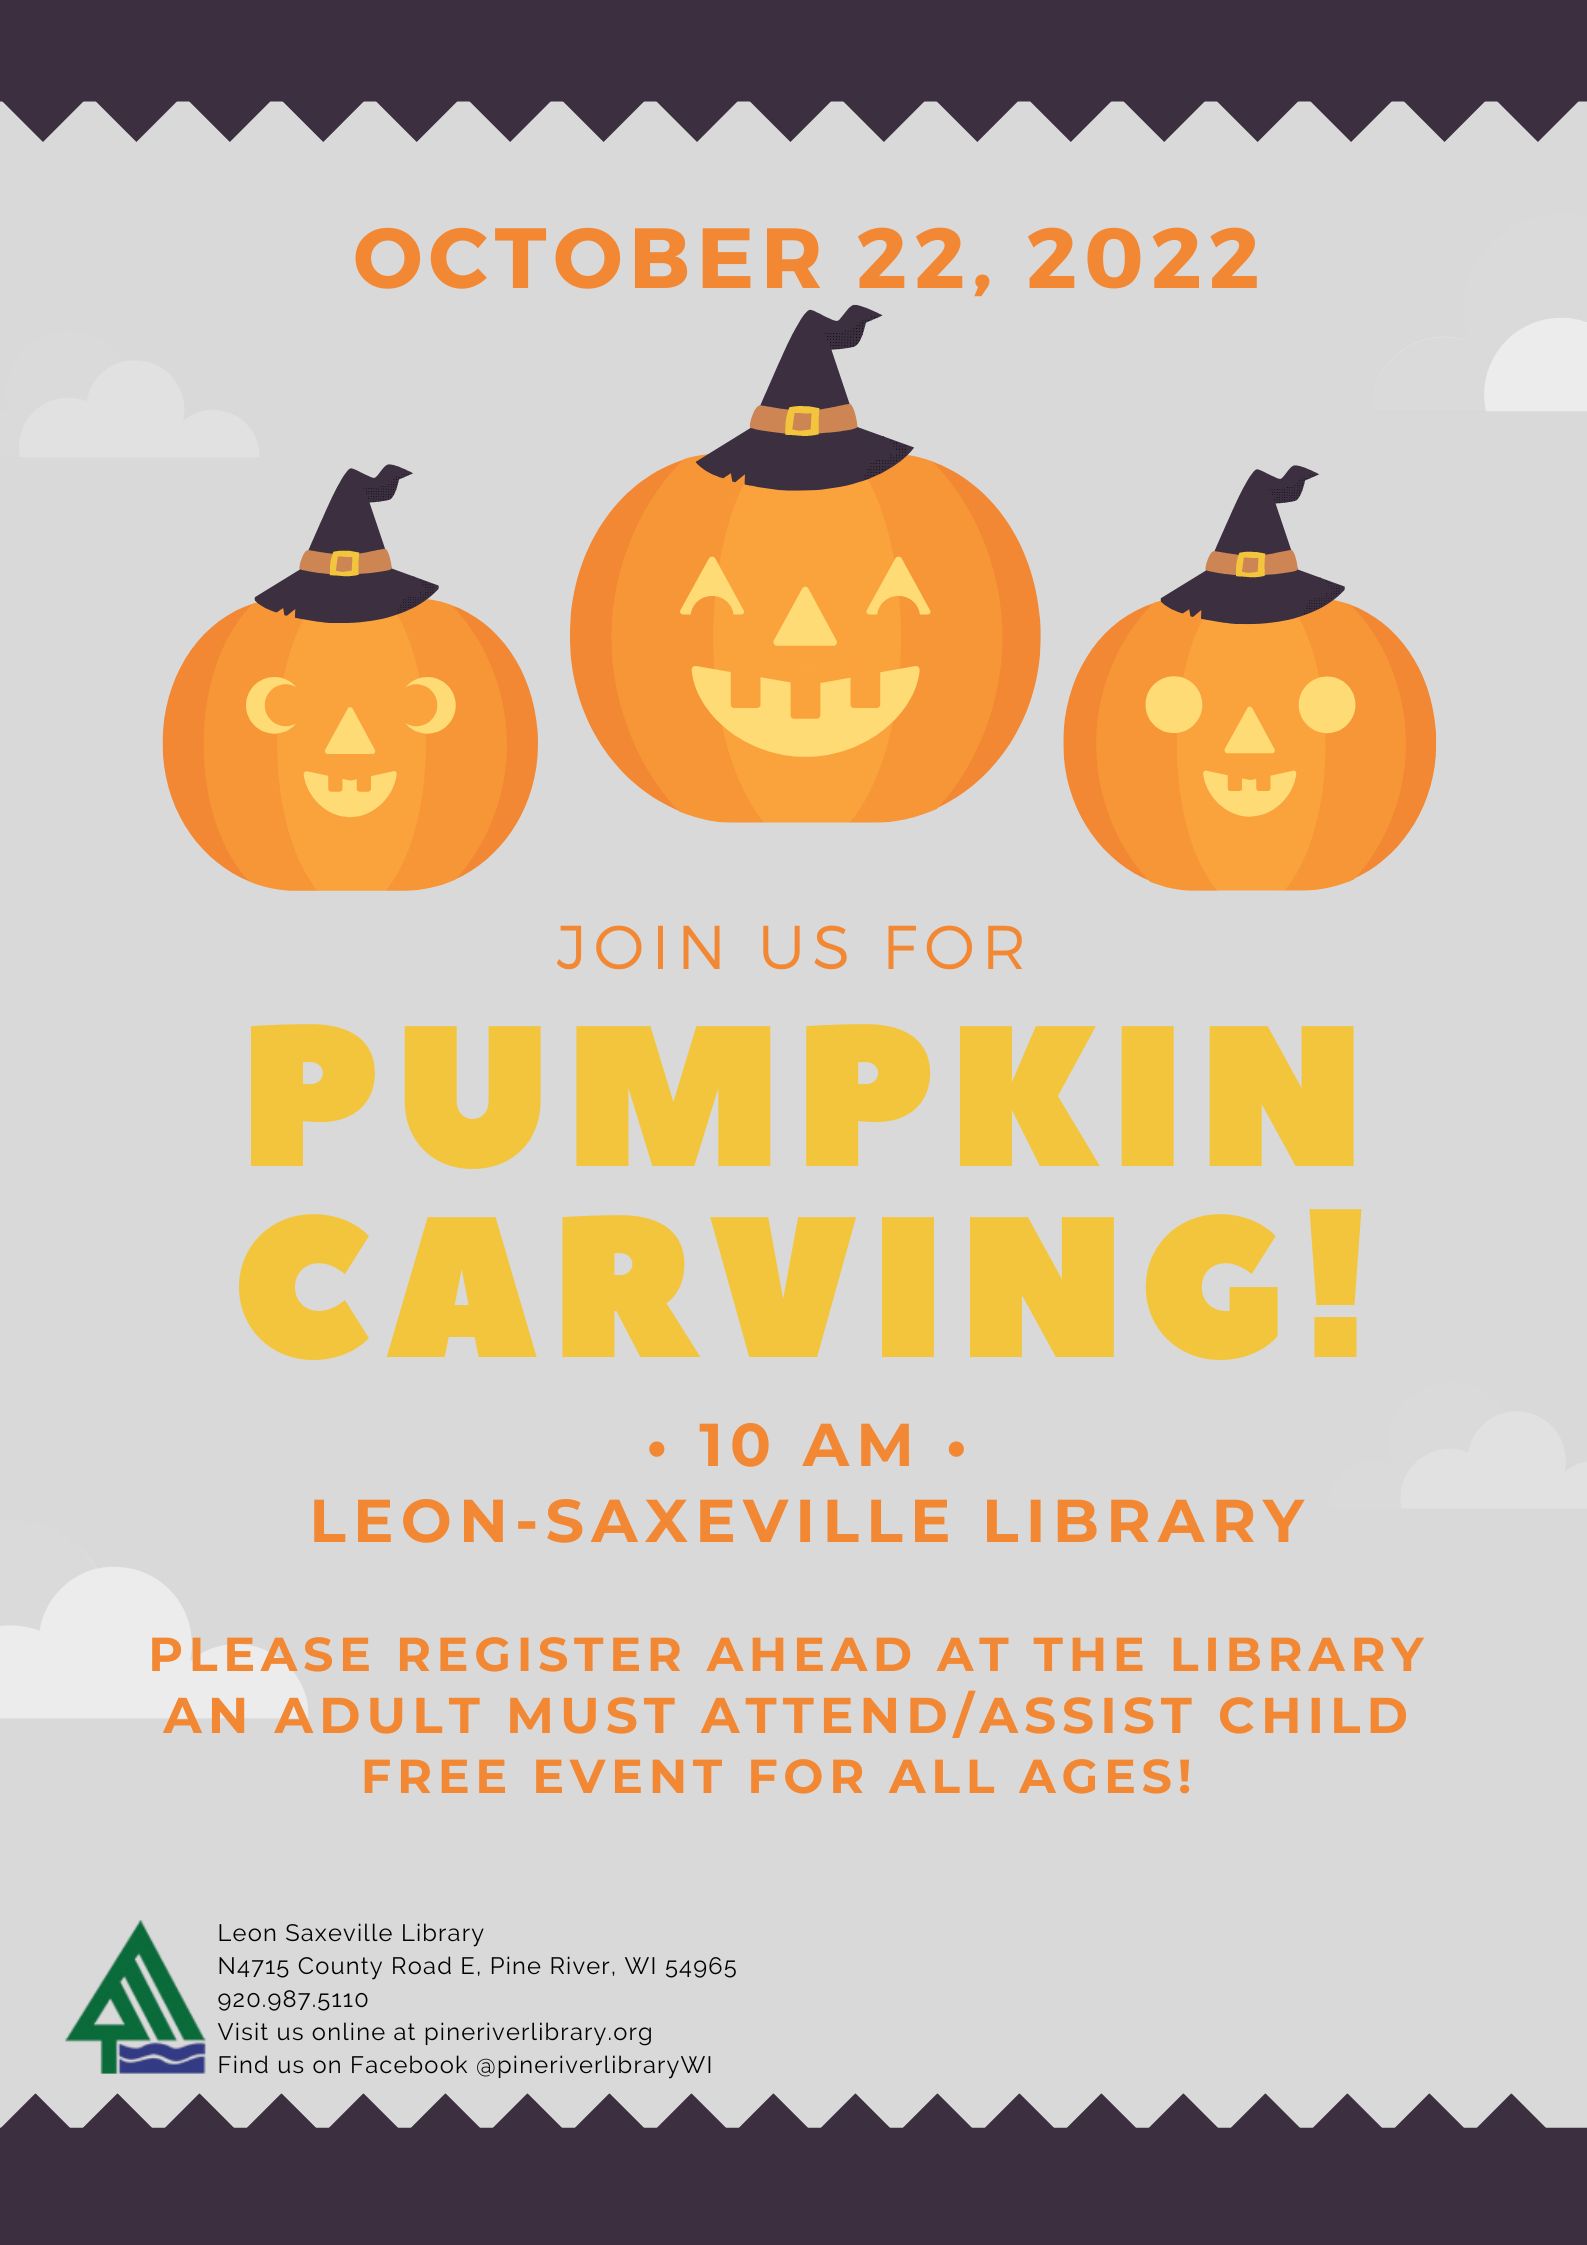 It's Pumpkin Carving Time again--please sign-up ahead